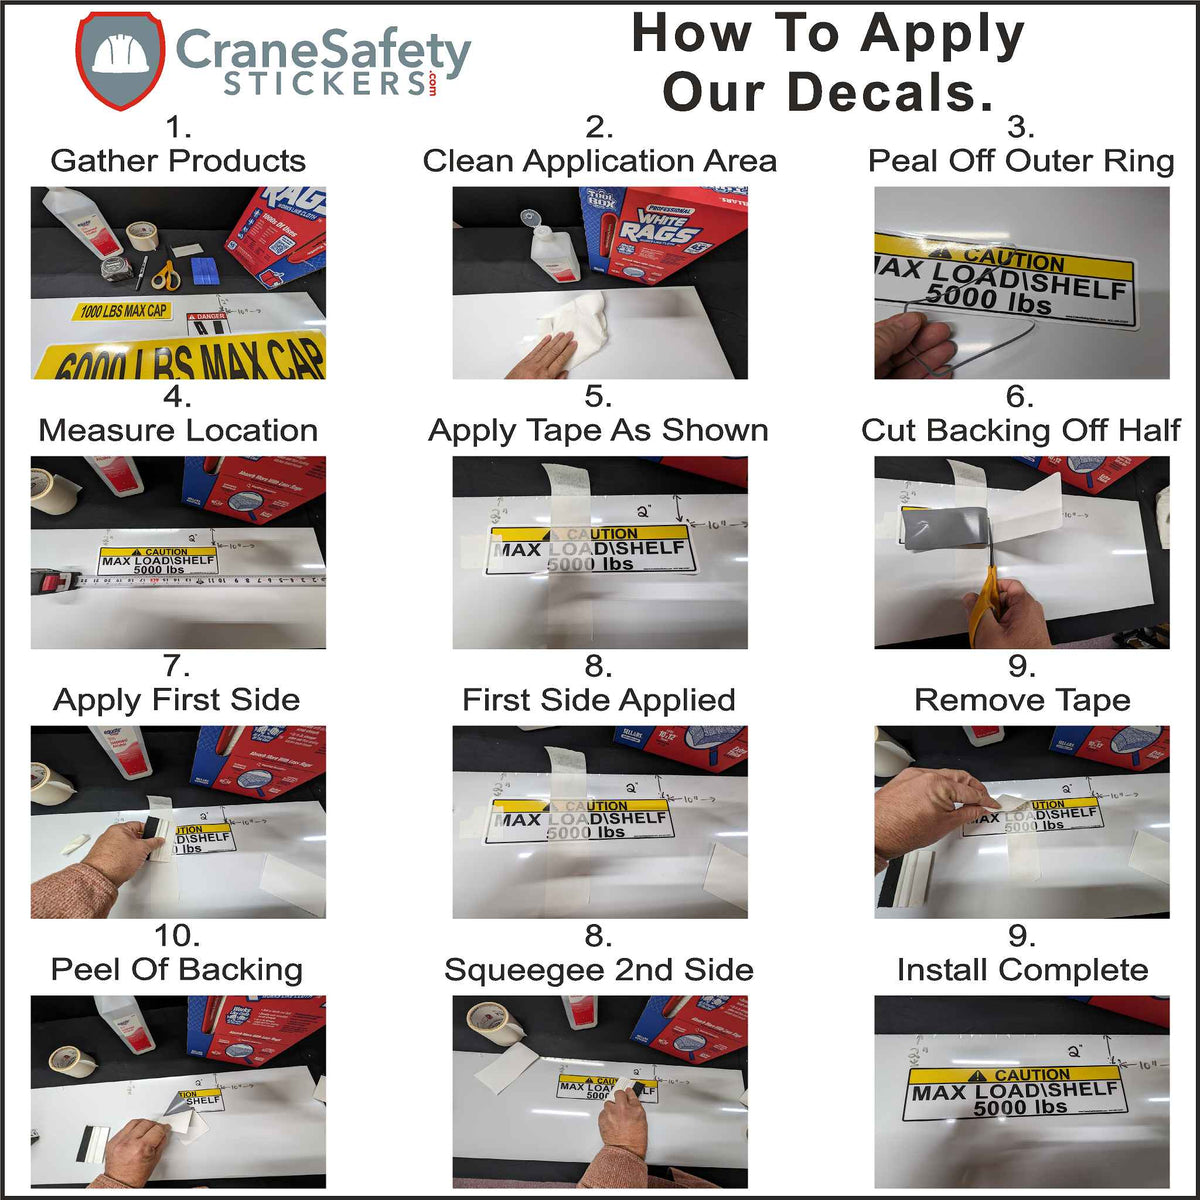 Directions On How To Apply Our Red White and Black OSHA Pinch Point Sticker With An Arrow Pointing Right.